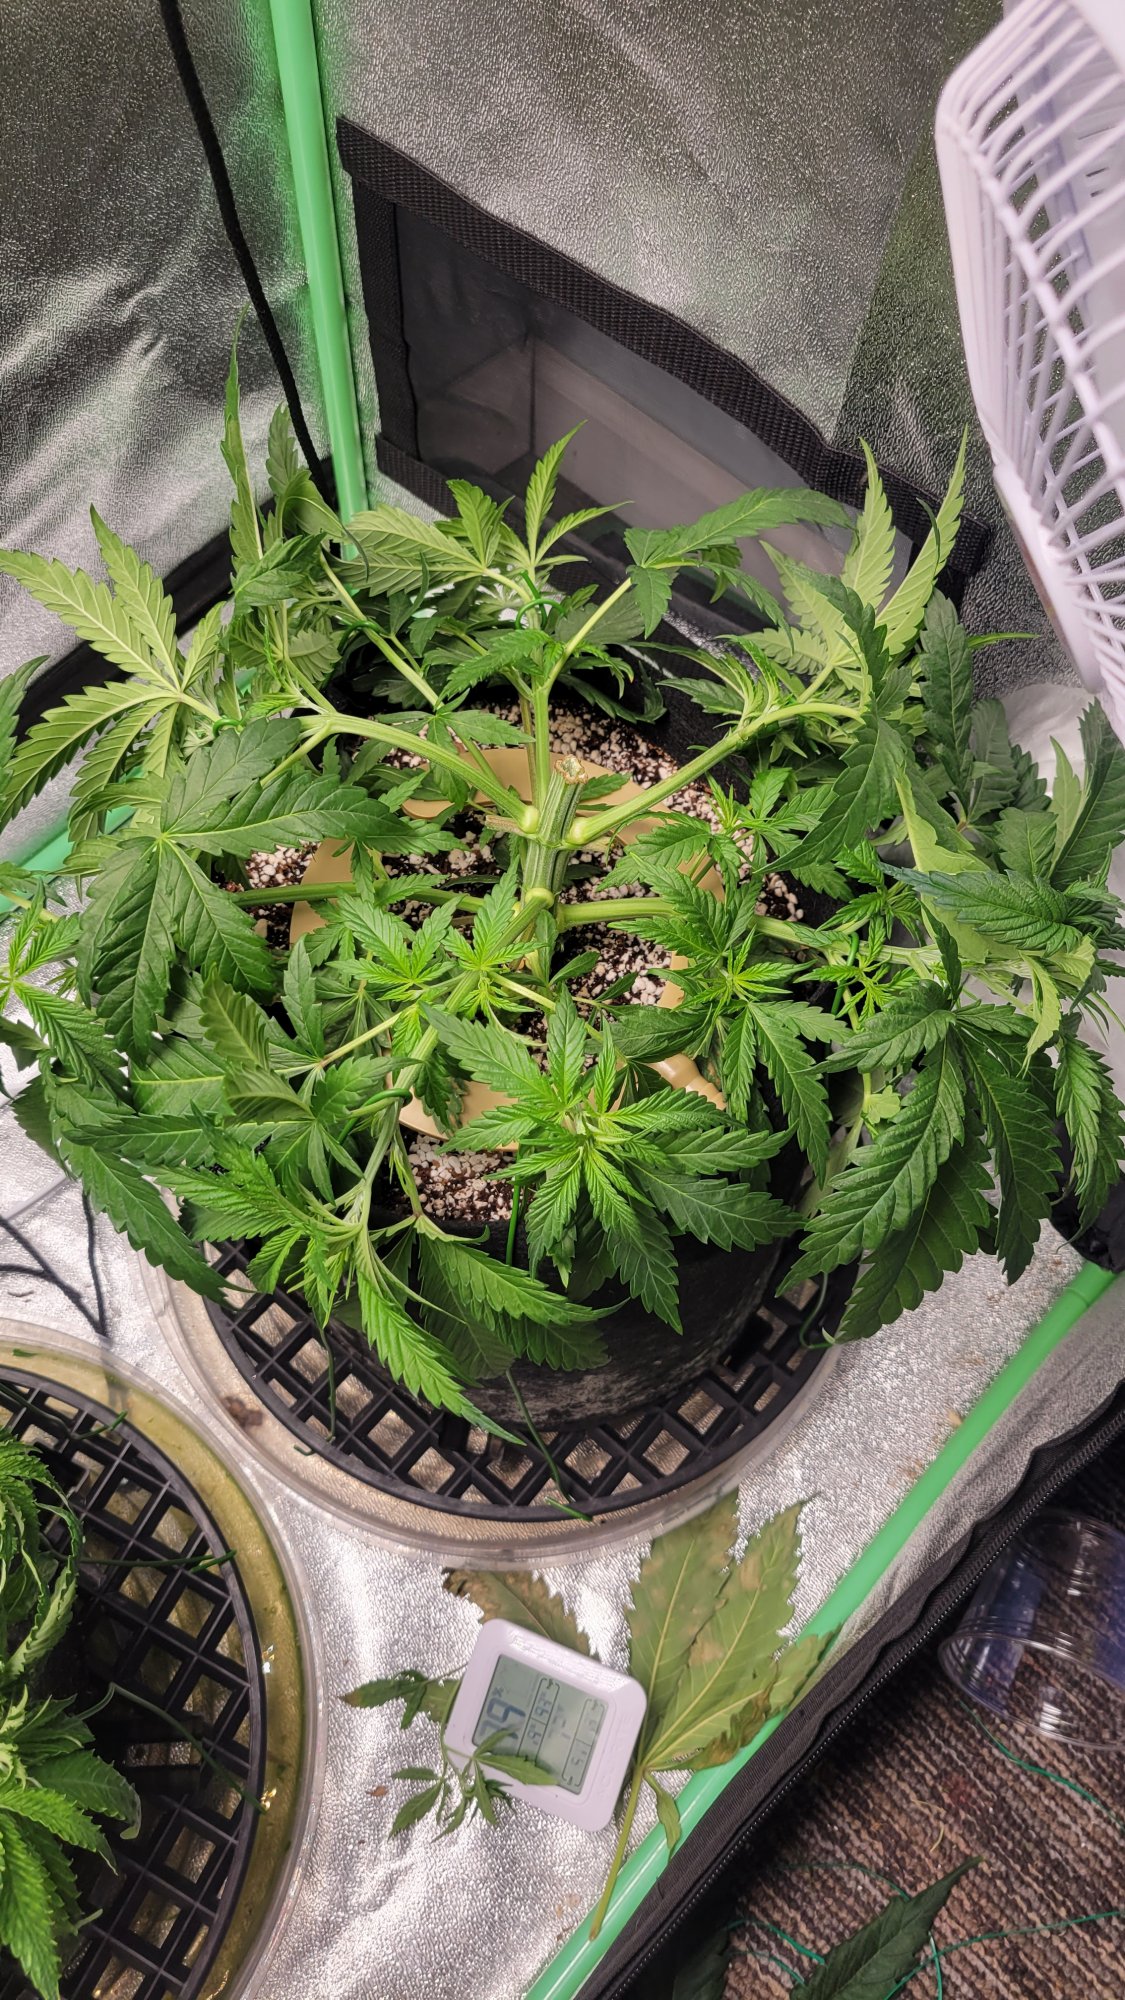 Lst and topping a plant